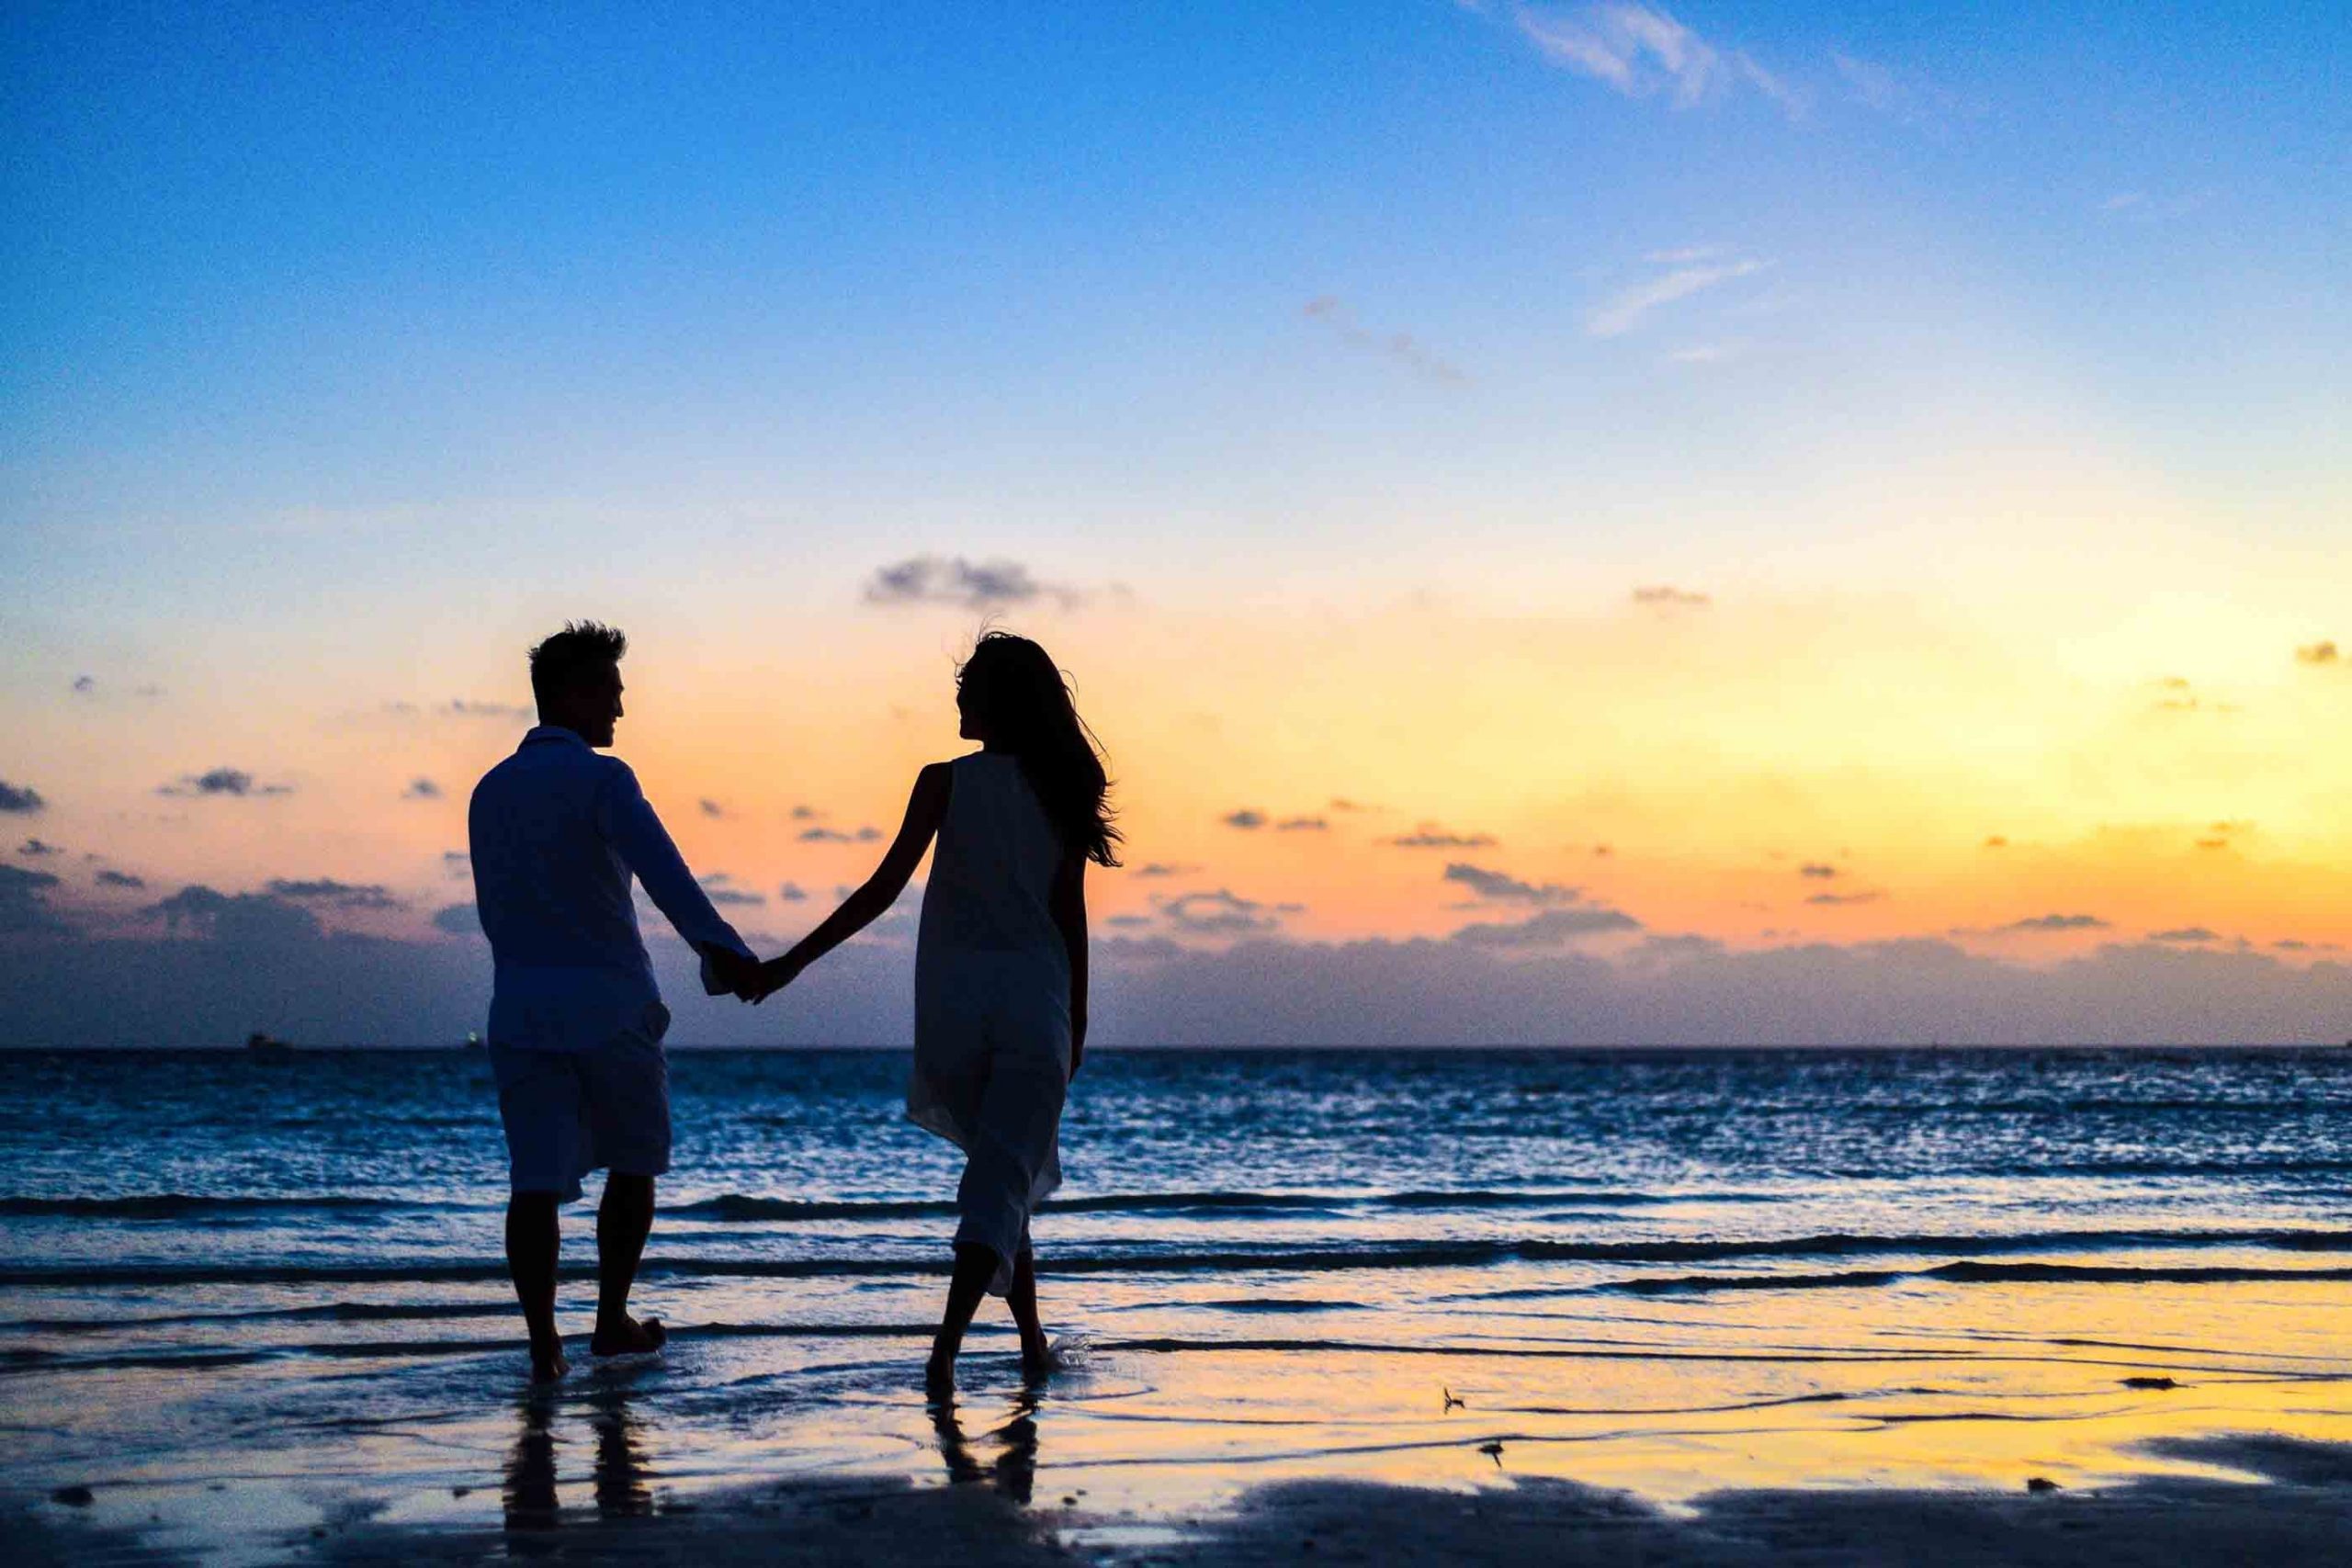 A romantic image of man and woman walking together on the beach and holding hands with sunset in the background